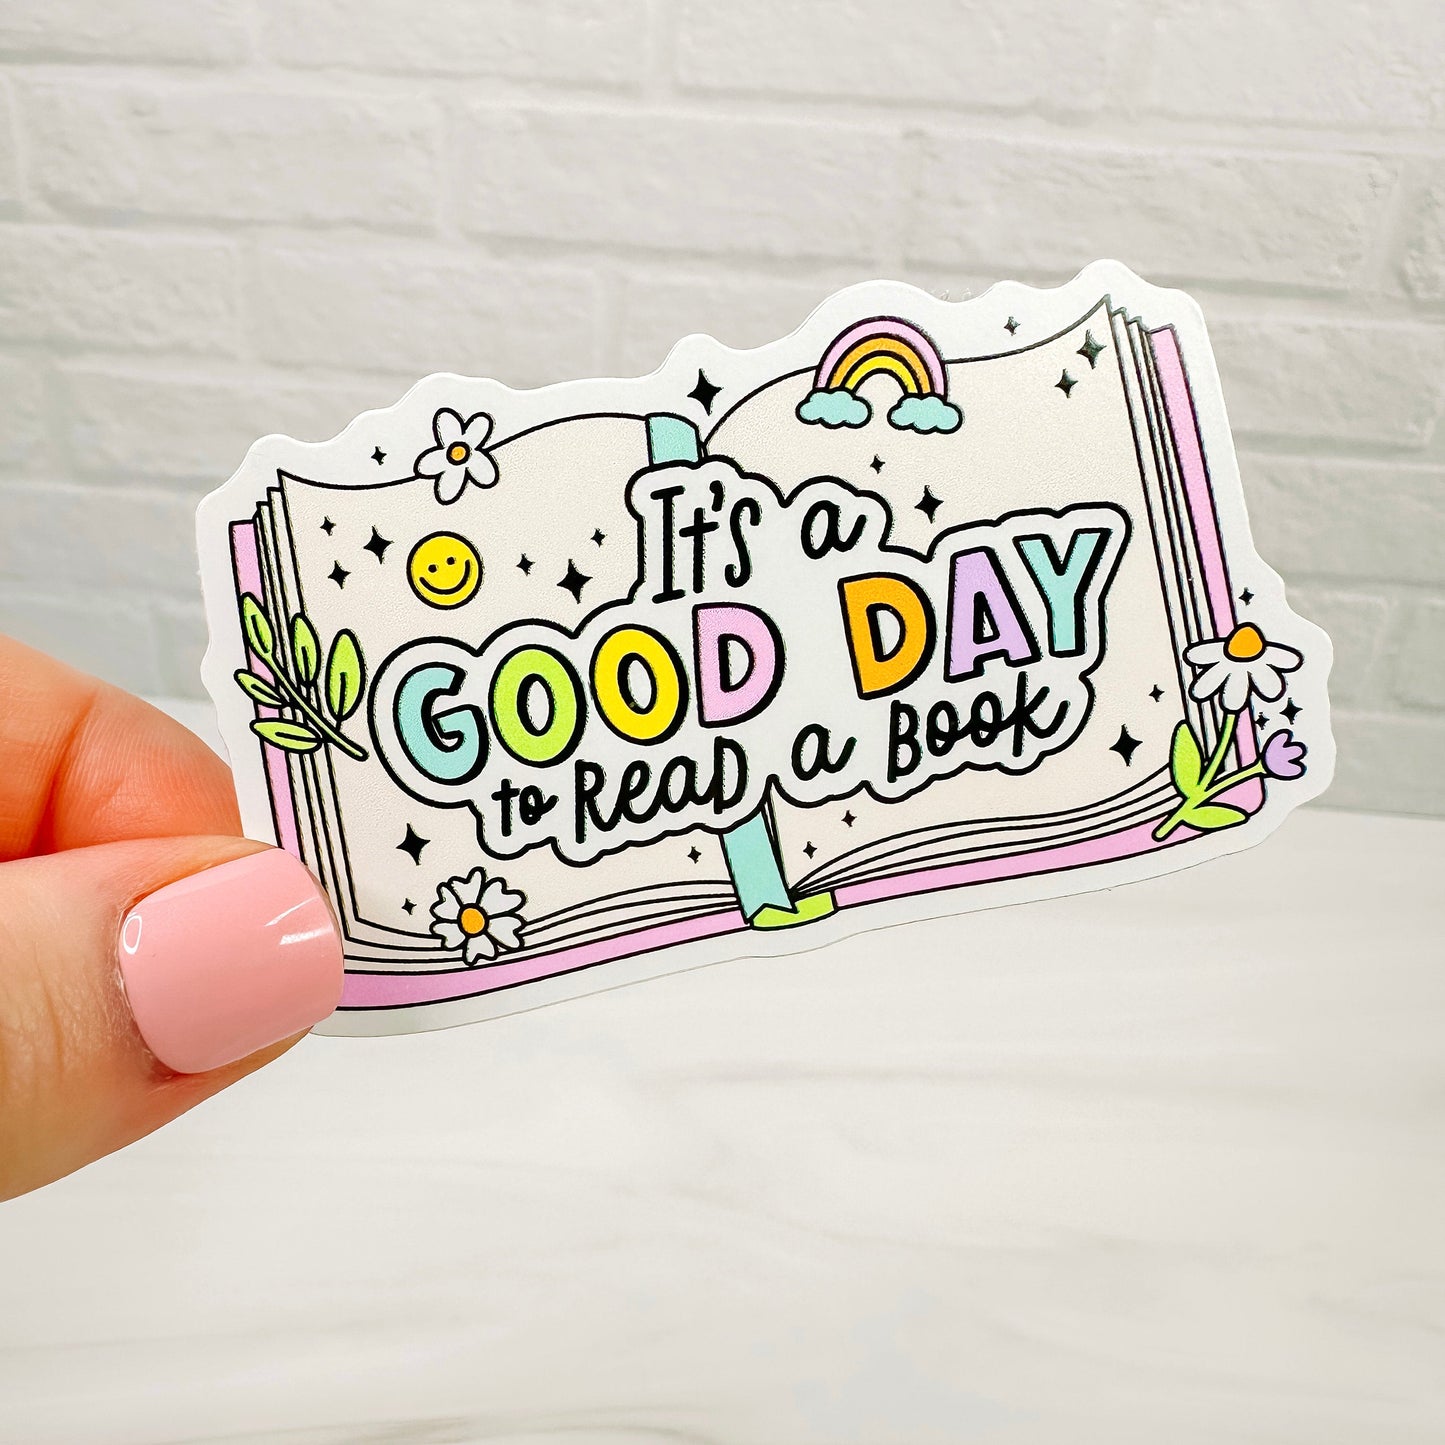 It's a Good Day to Read a Book - Bookish Vinyl Sticker-Cricket Paper Co.